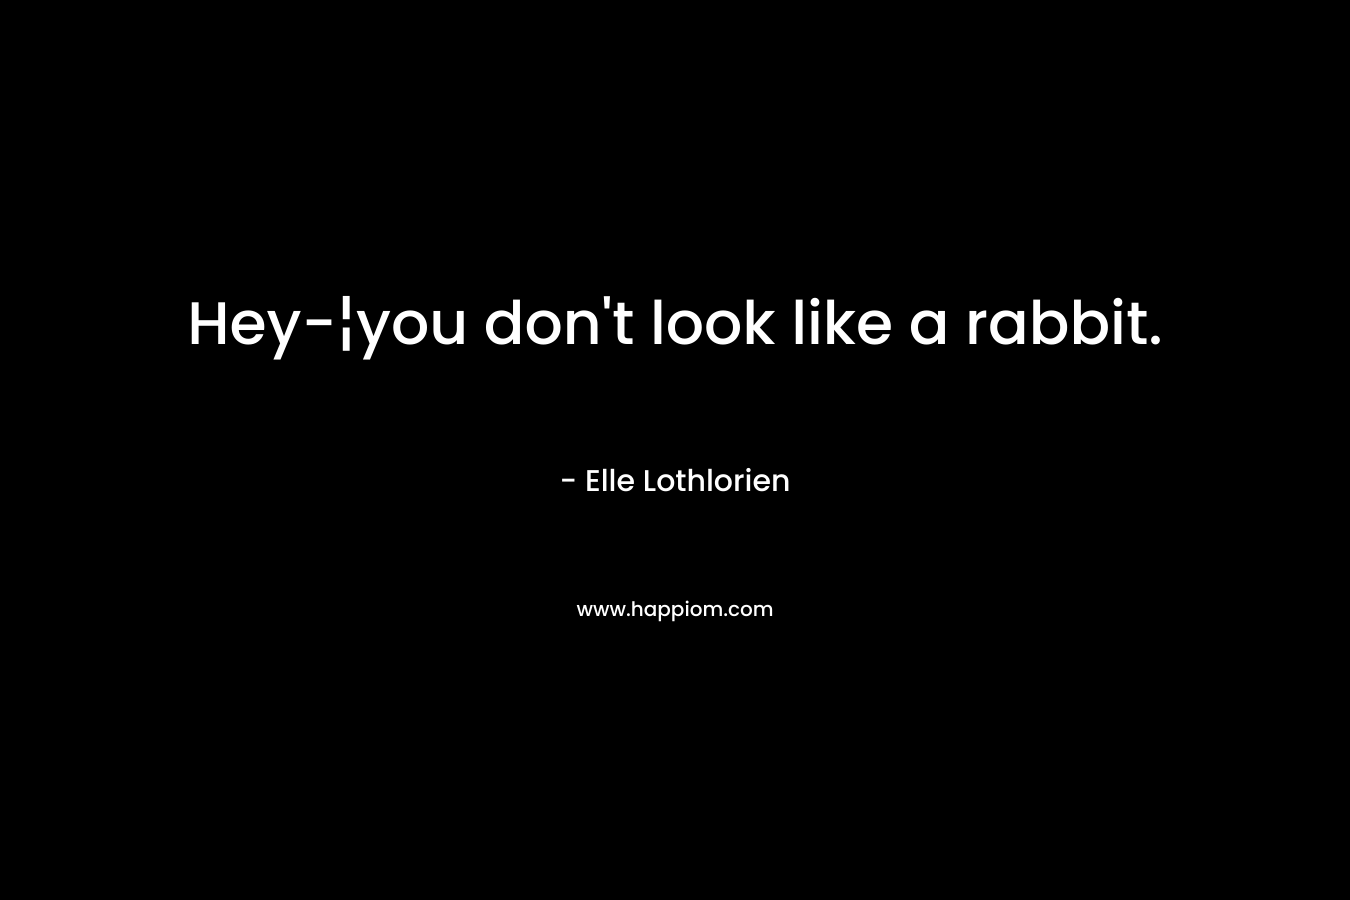 Hey-¦you don't look like a rabbit.